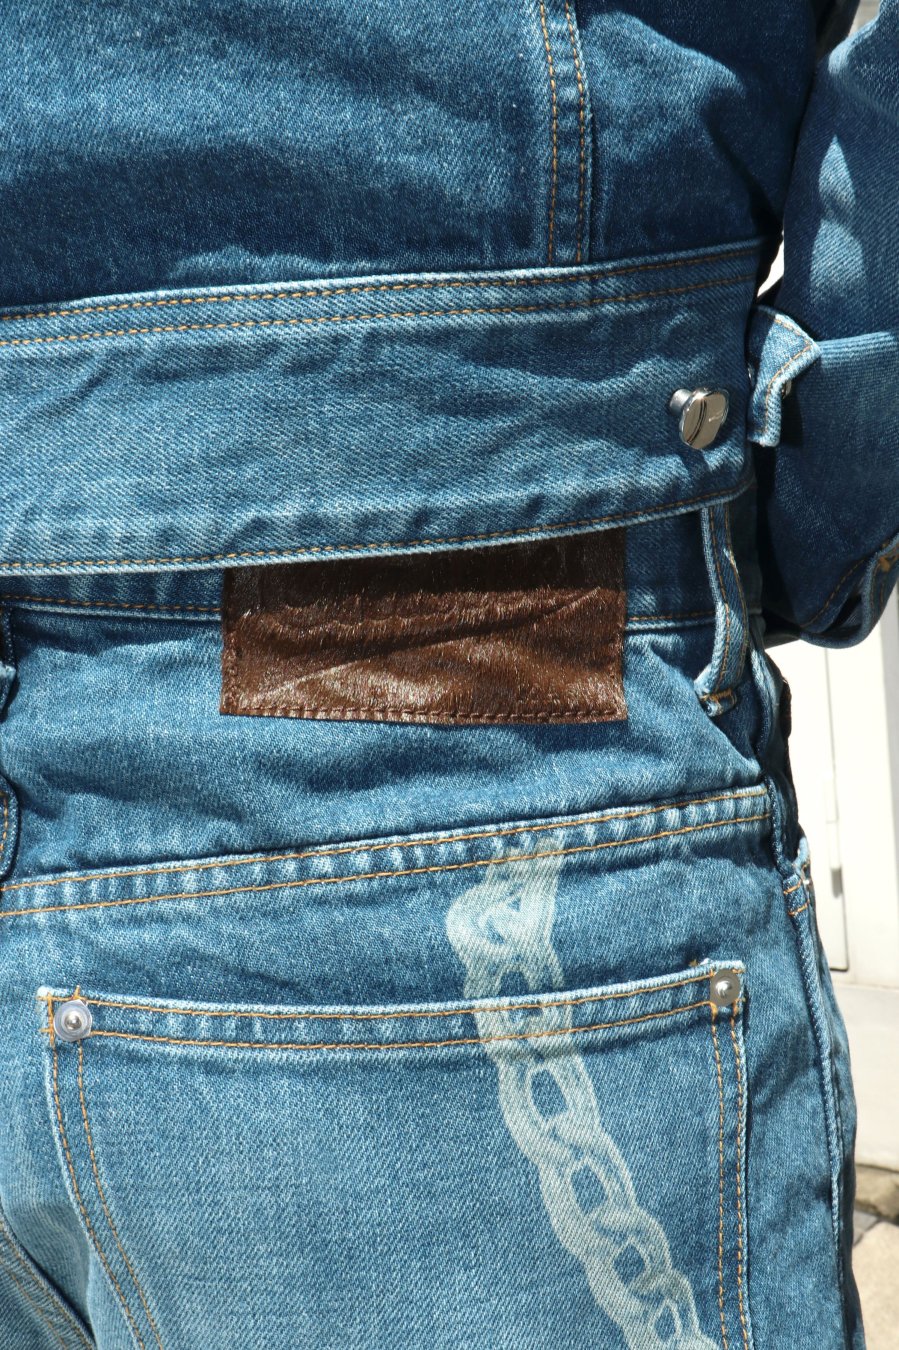 MASU（エムエーエスユー）のBAGGY FIT JEANS WALLET CHAINの通販サイト